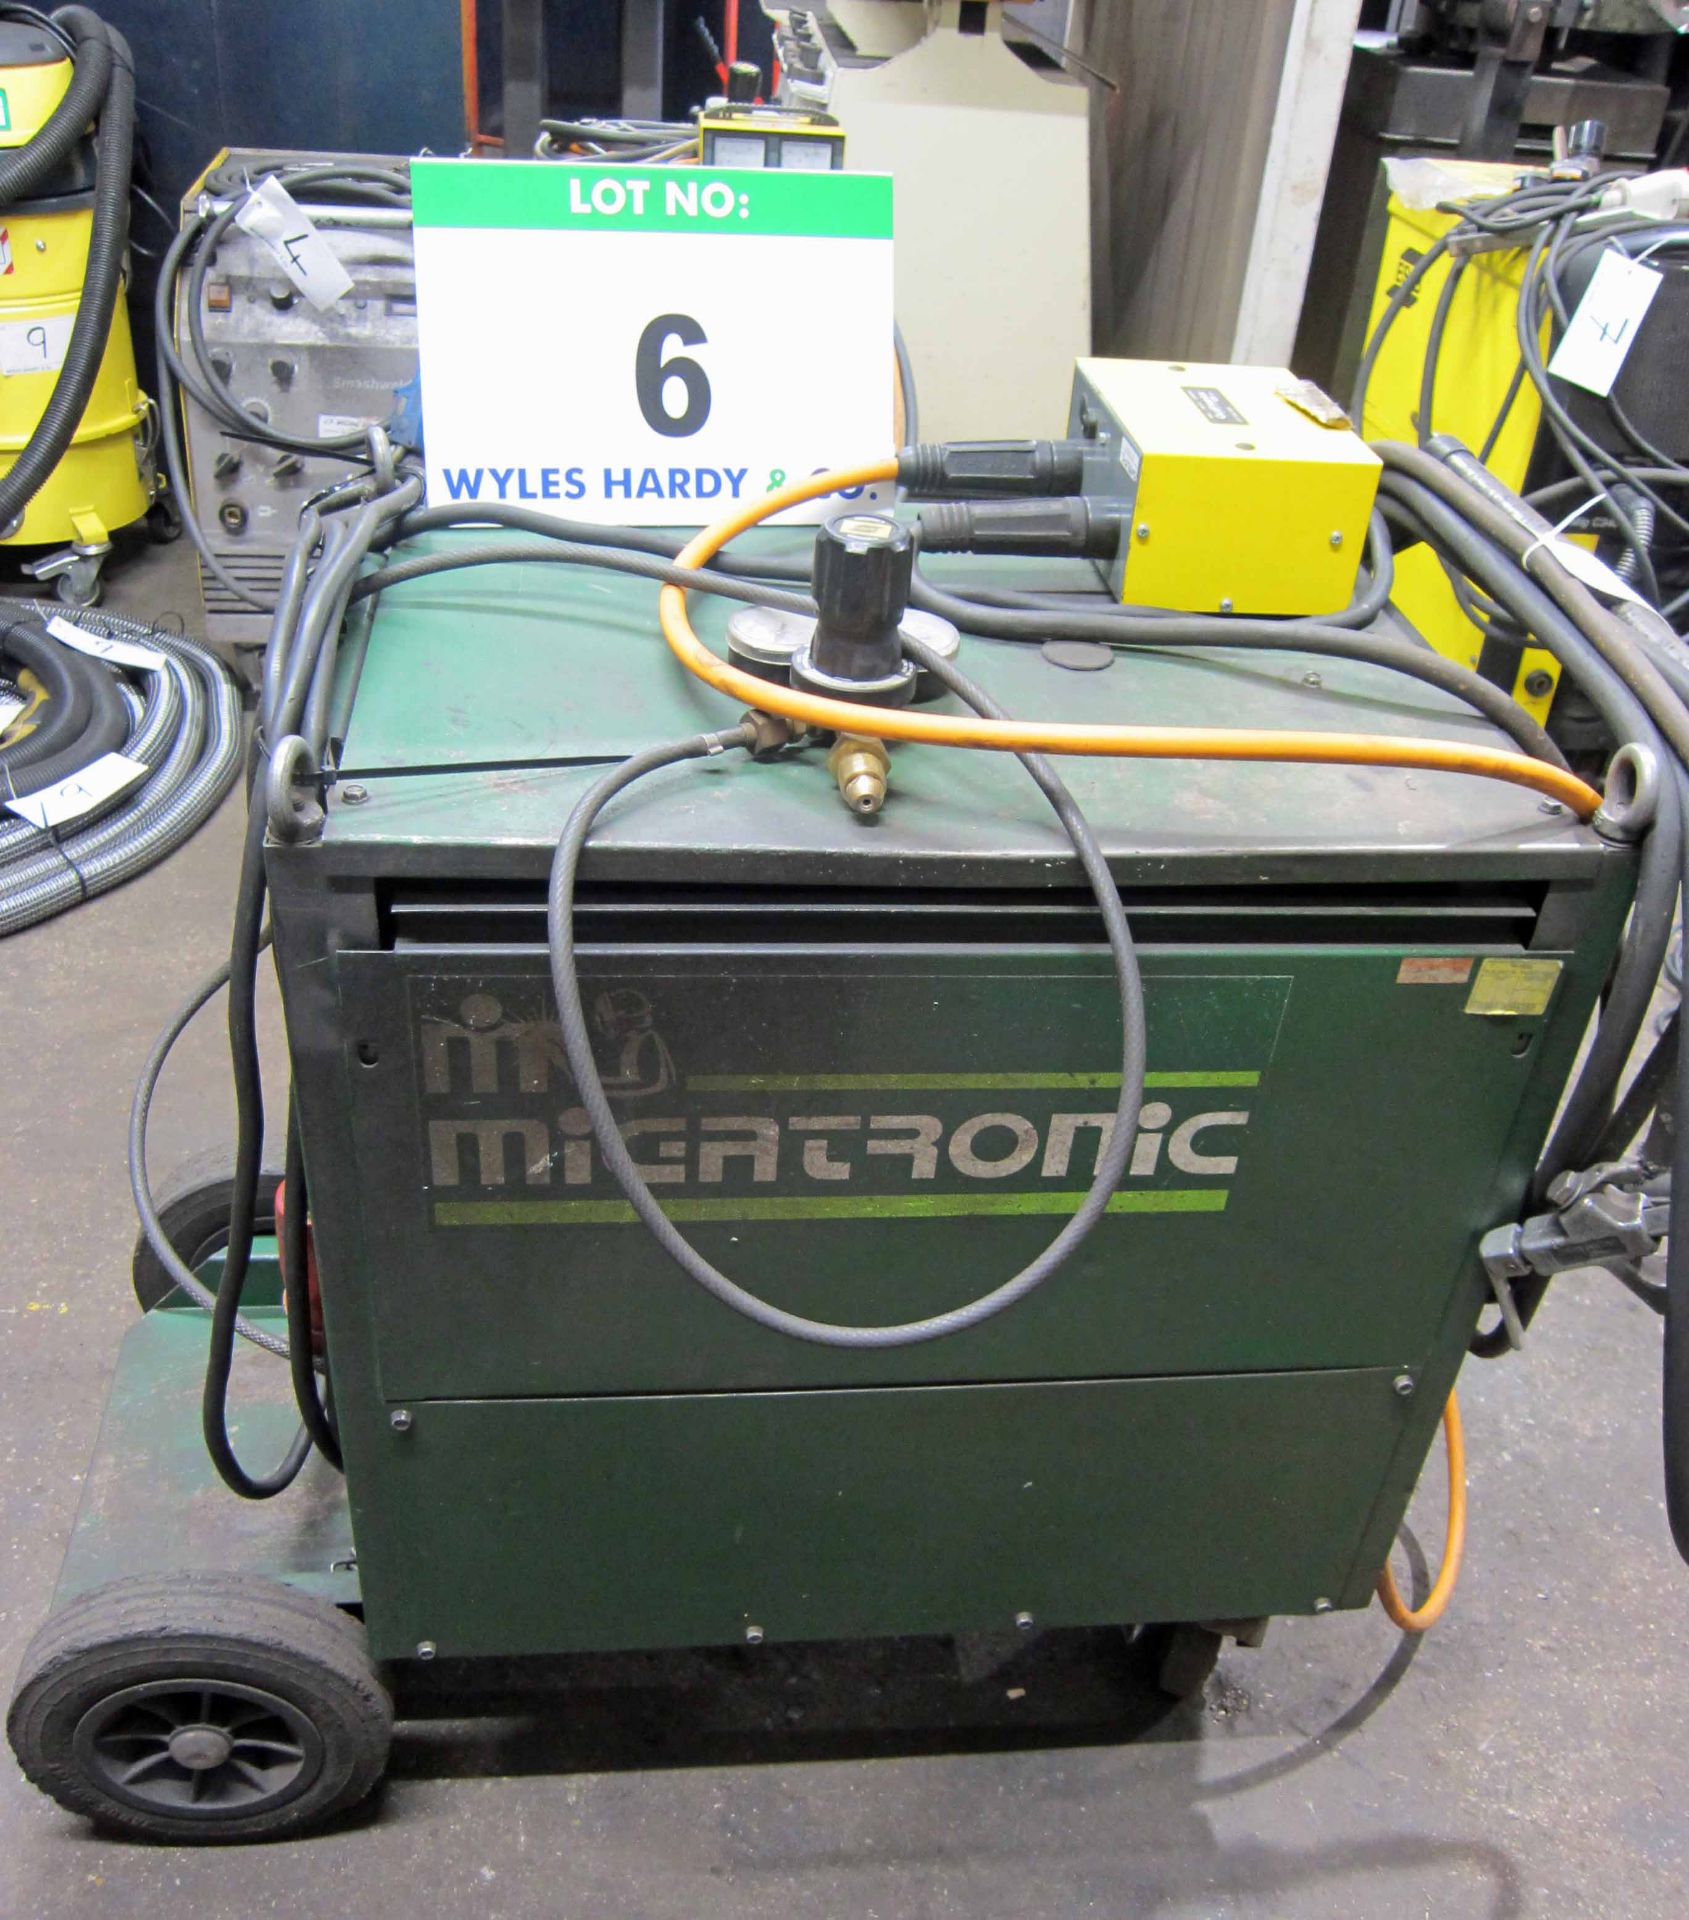 A MIGTRONIC Model Dyna Mig 335 Mig Welder (KDO335) complete with QUALITRONICS Voltage and Amp and - Bild 3 aus 7